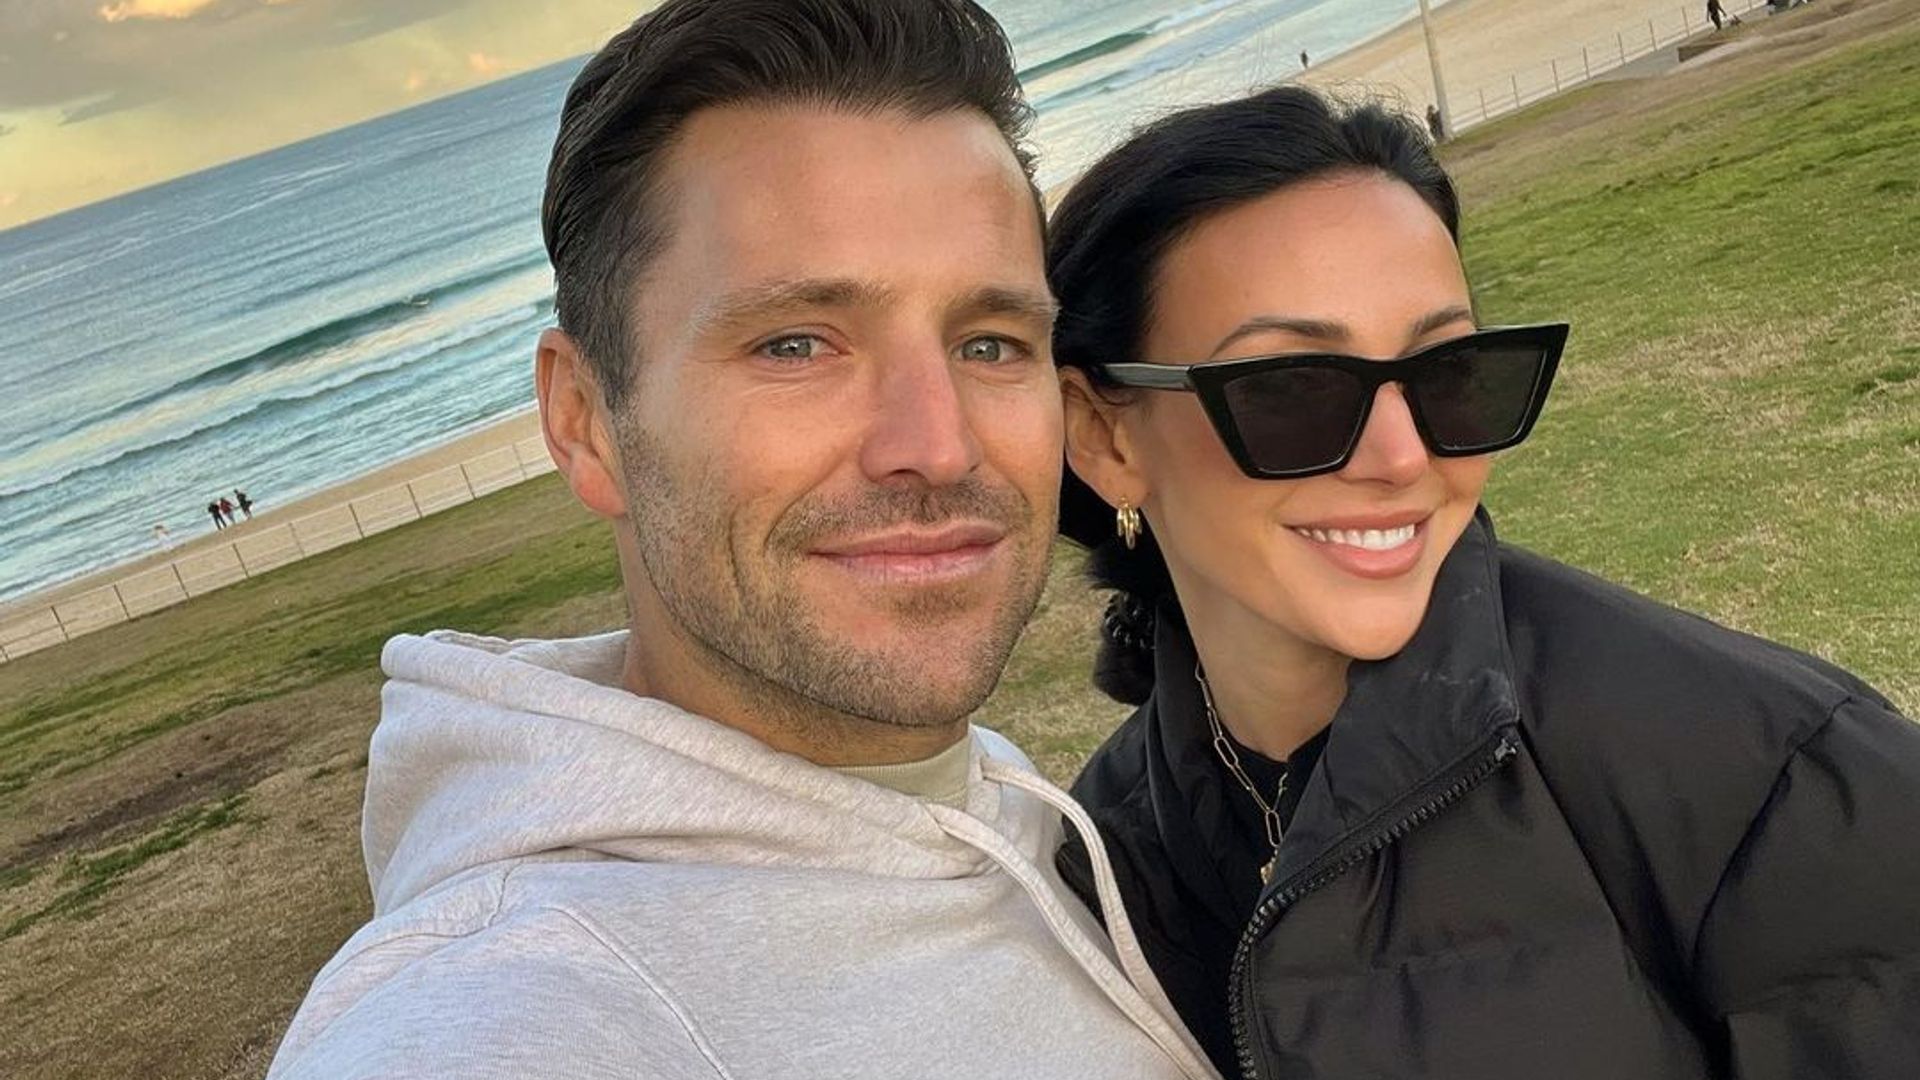 Mark and Michelle posing for a selfie at the beach